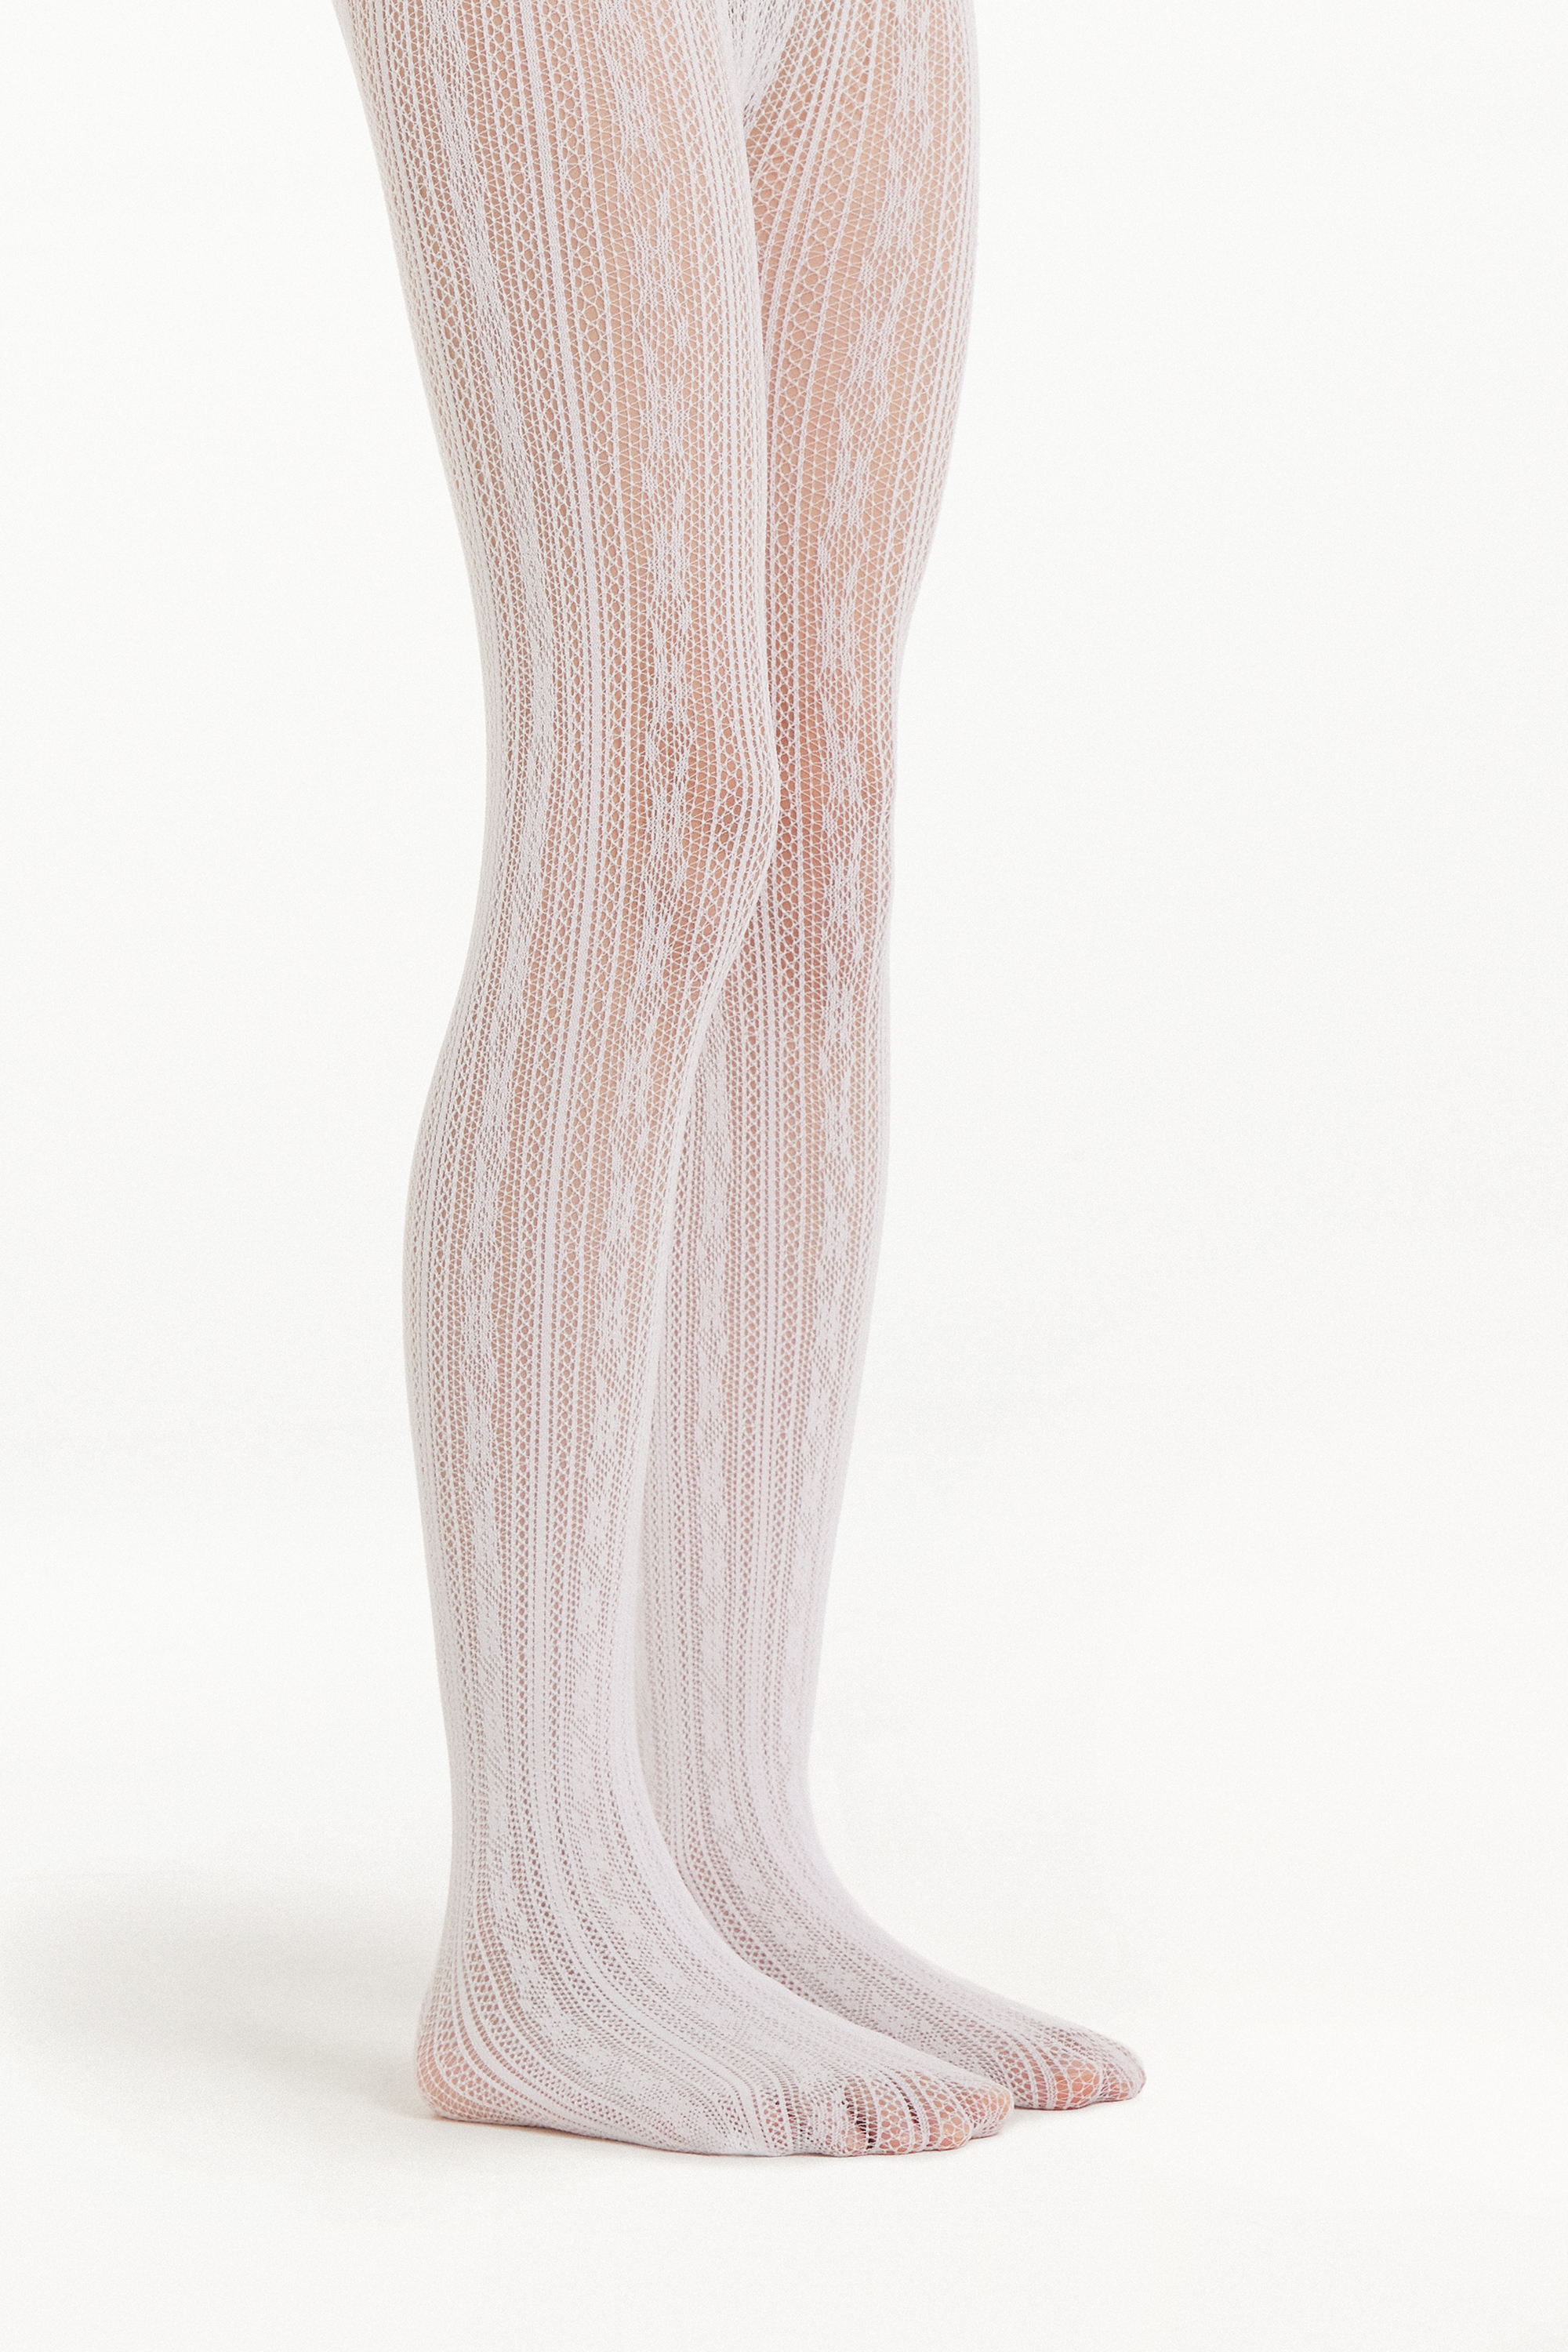 Girls’ Floral Striped Mesh Tights